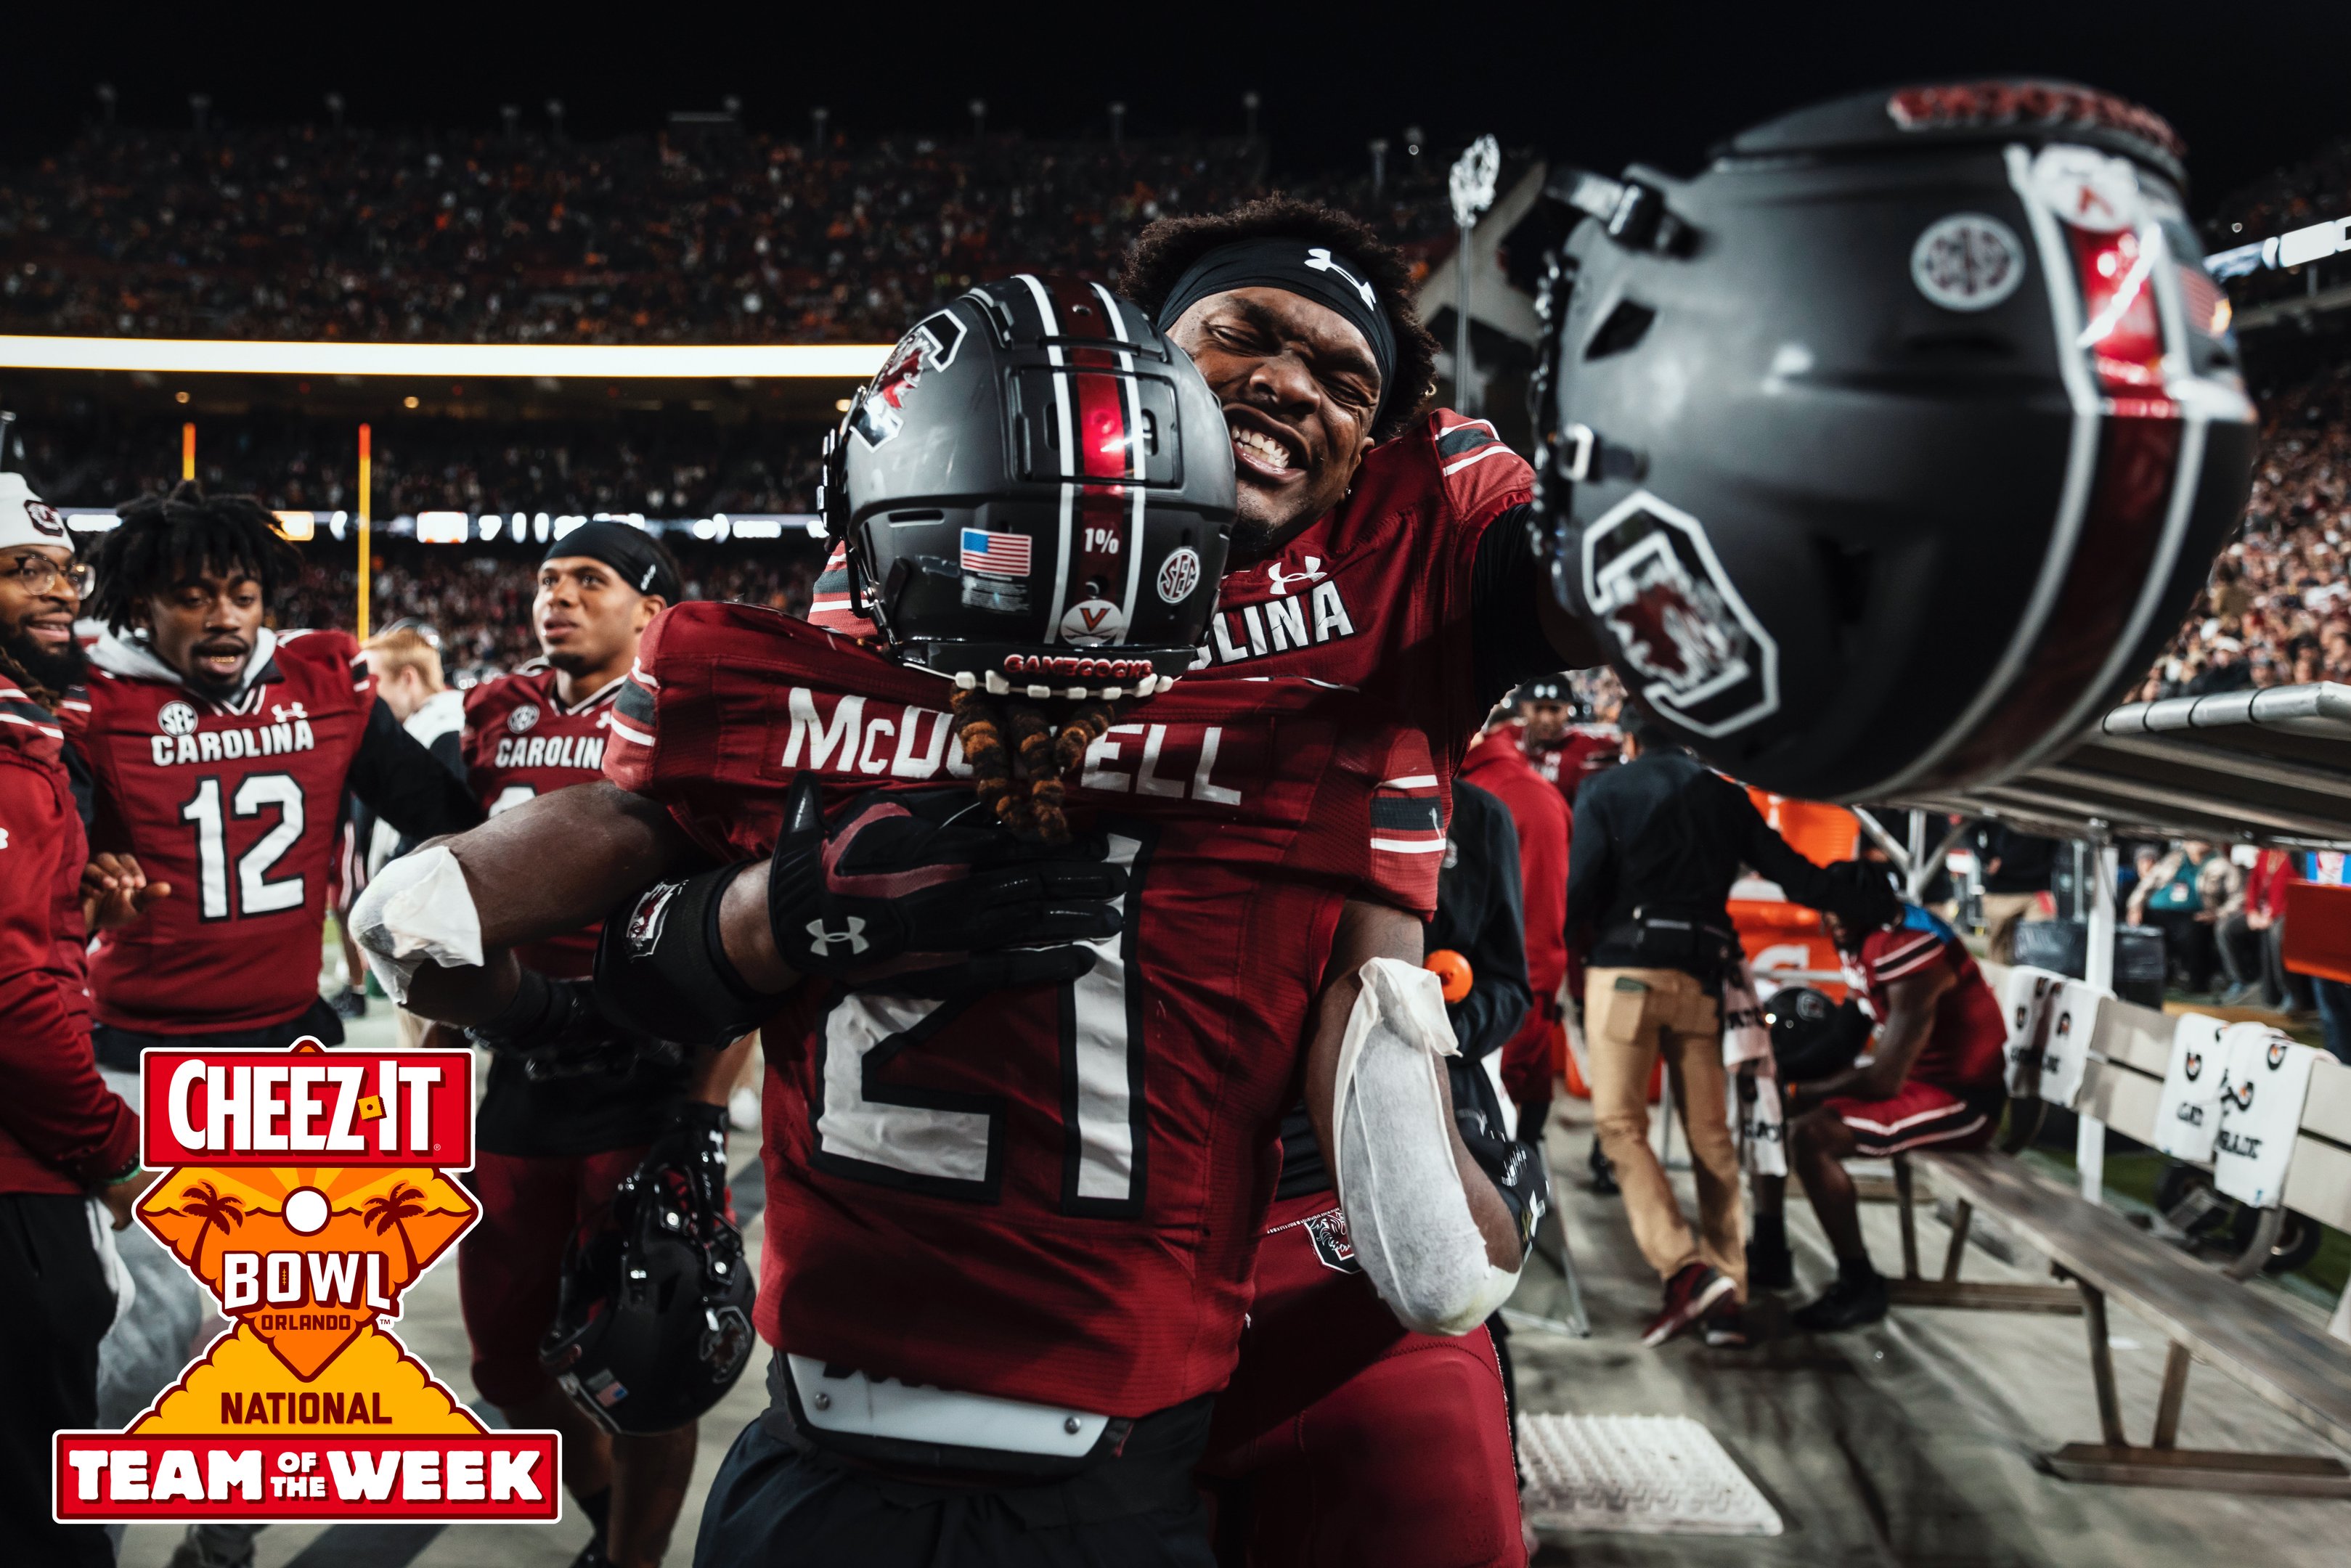 South Carolina is Cheez-It Bowl National Team of the Week